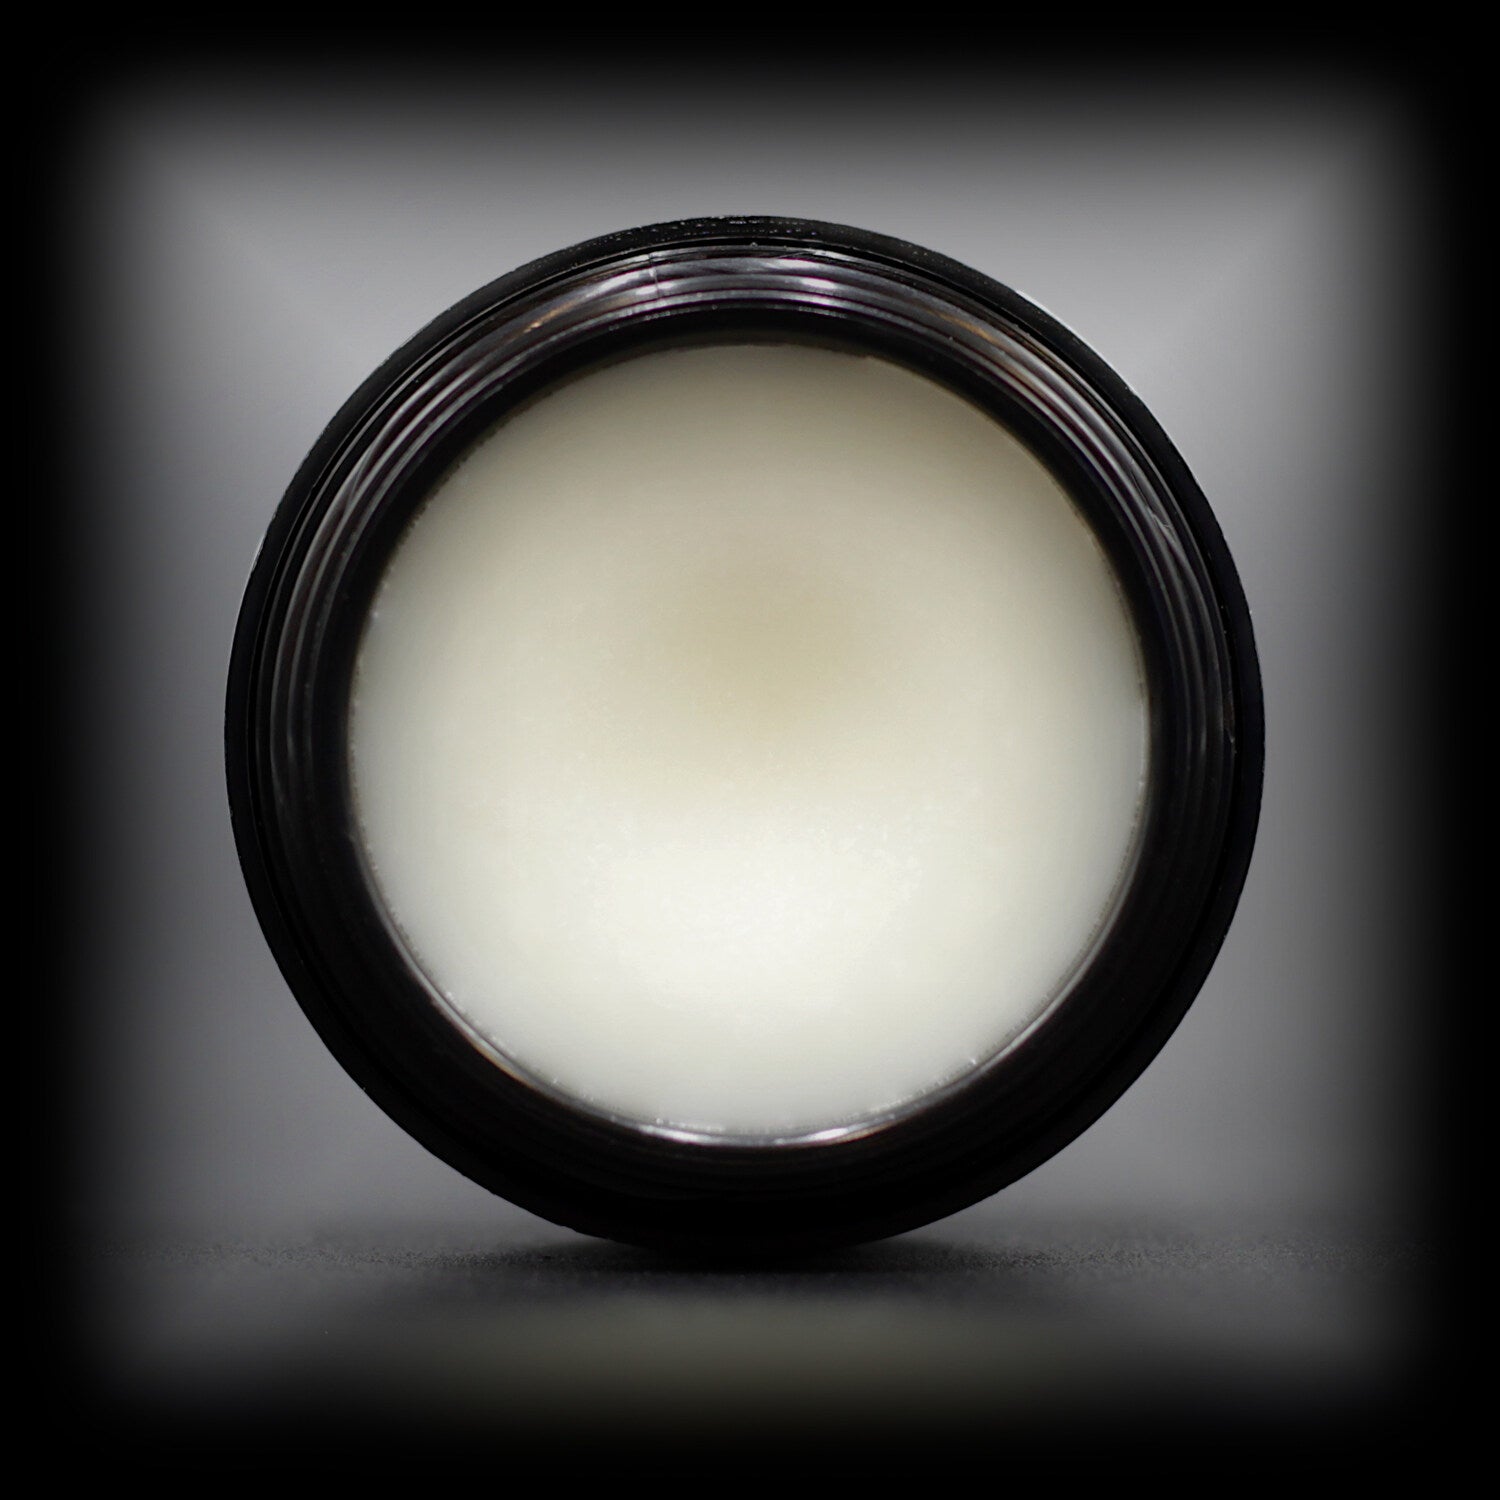 Naturally Wicked Toffee Apple Lip Balm Exposed With No Lid As Creamy, White, Lip Perfecting, Hydrating Balm